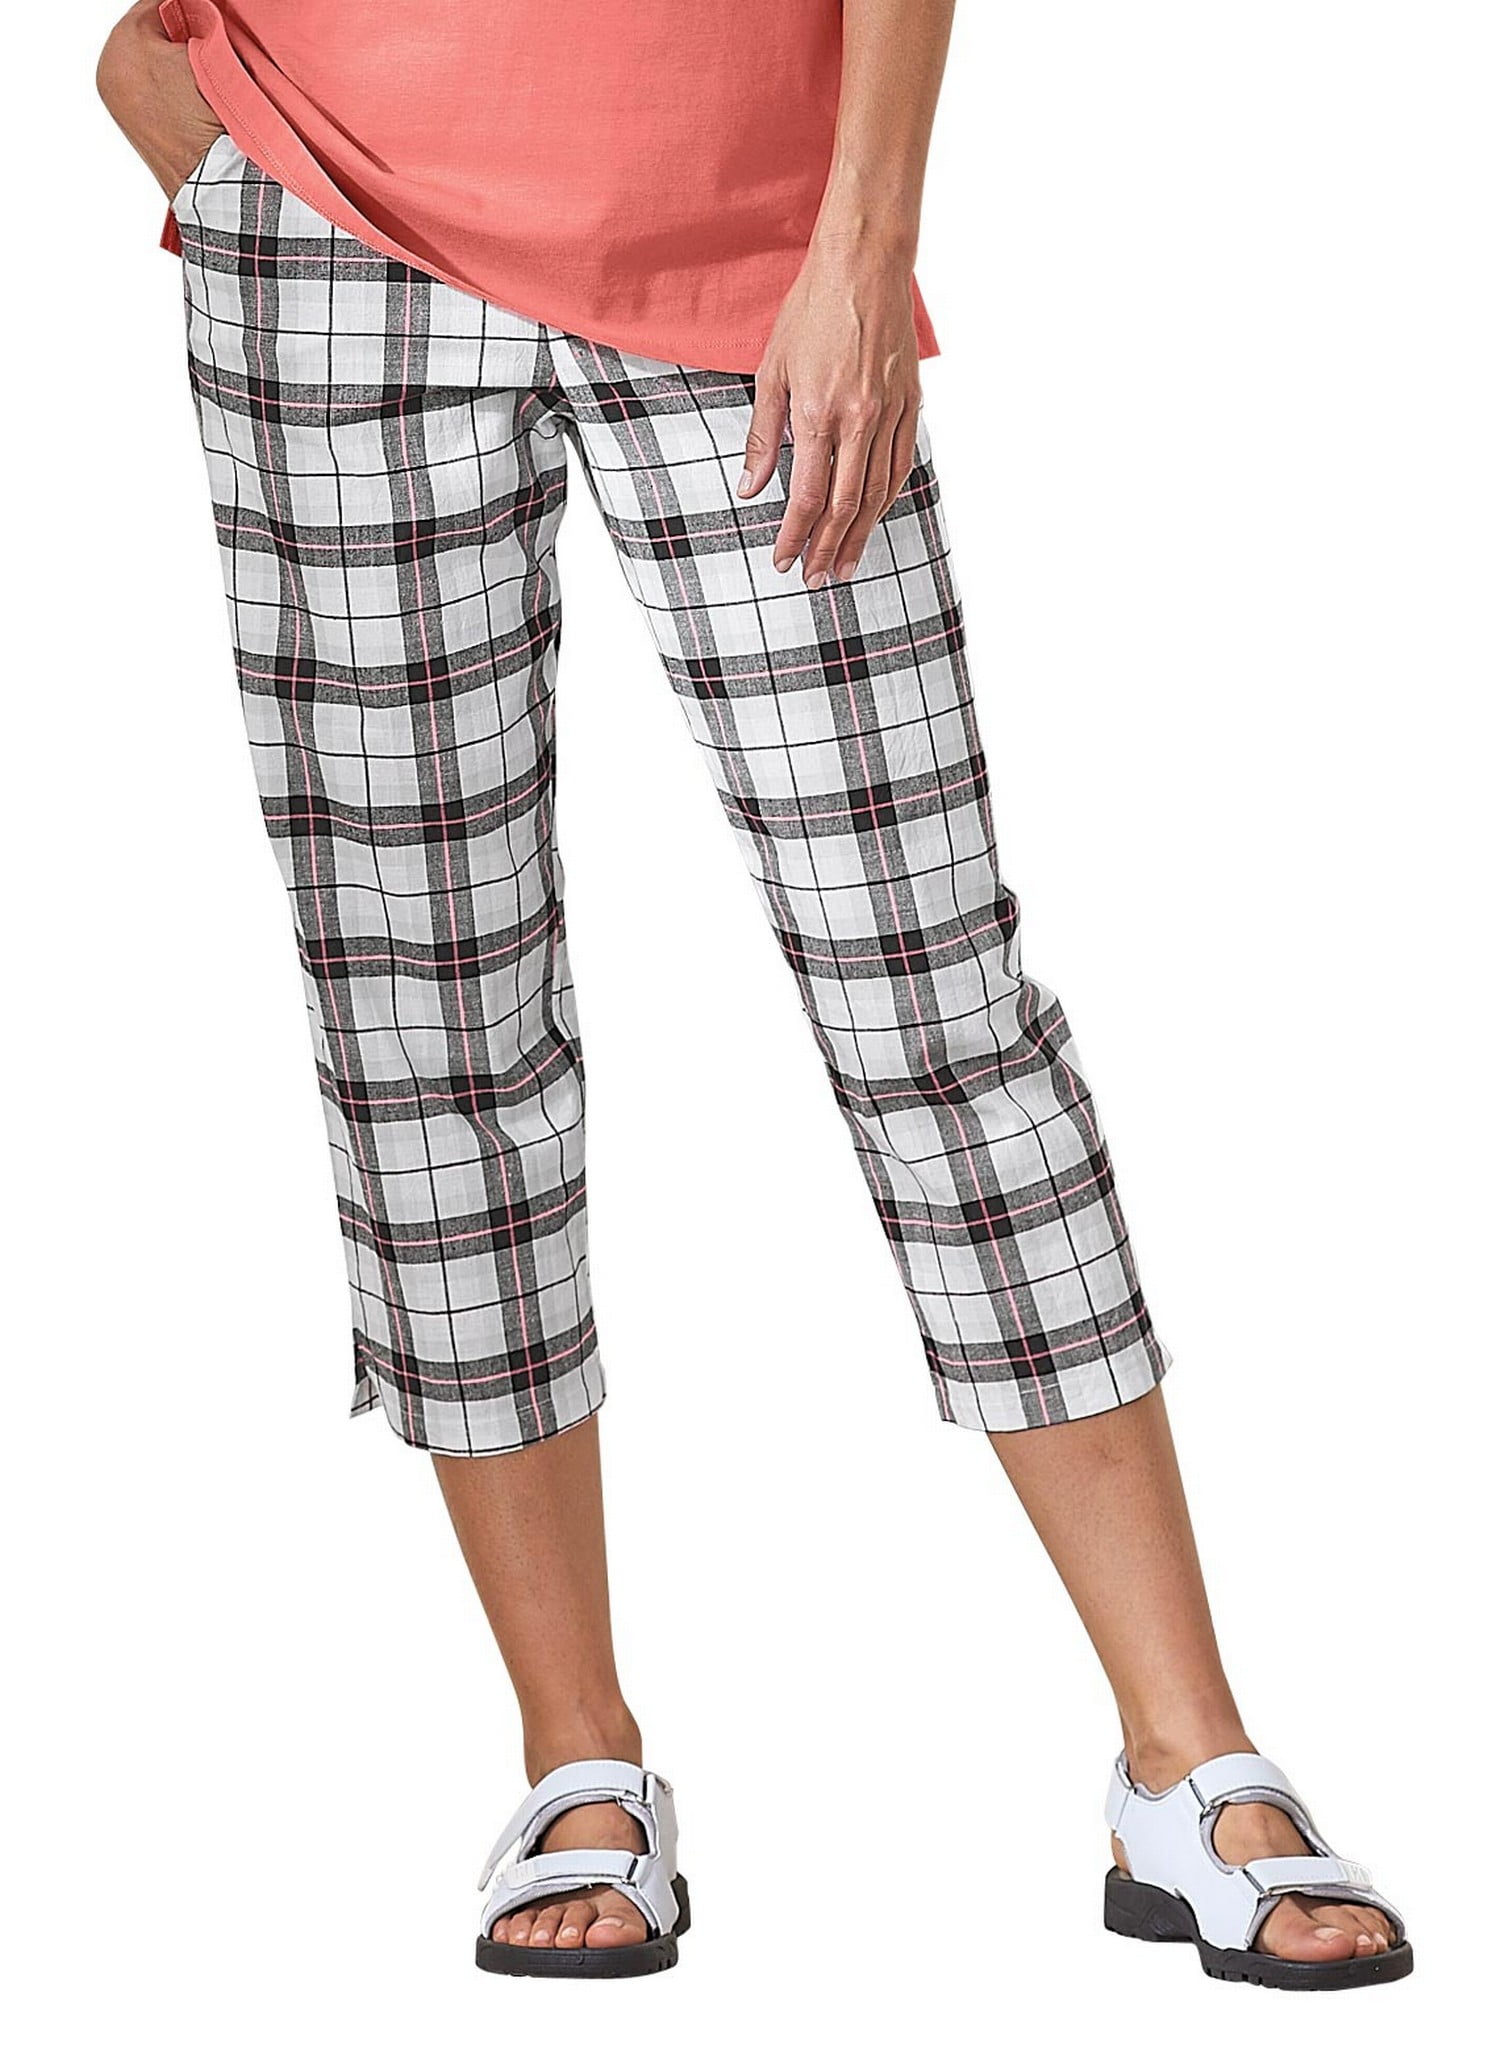 Plaid Capri Pants for Women  Casual Relaxed Fit Wide Leg Pants with  Pockets 